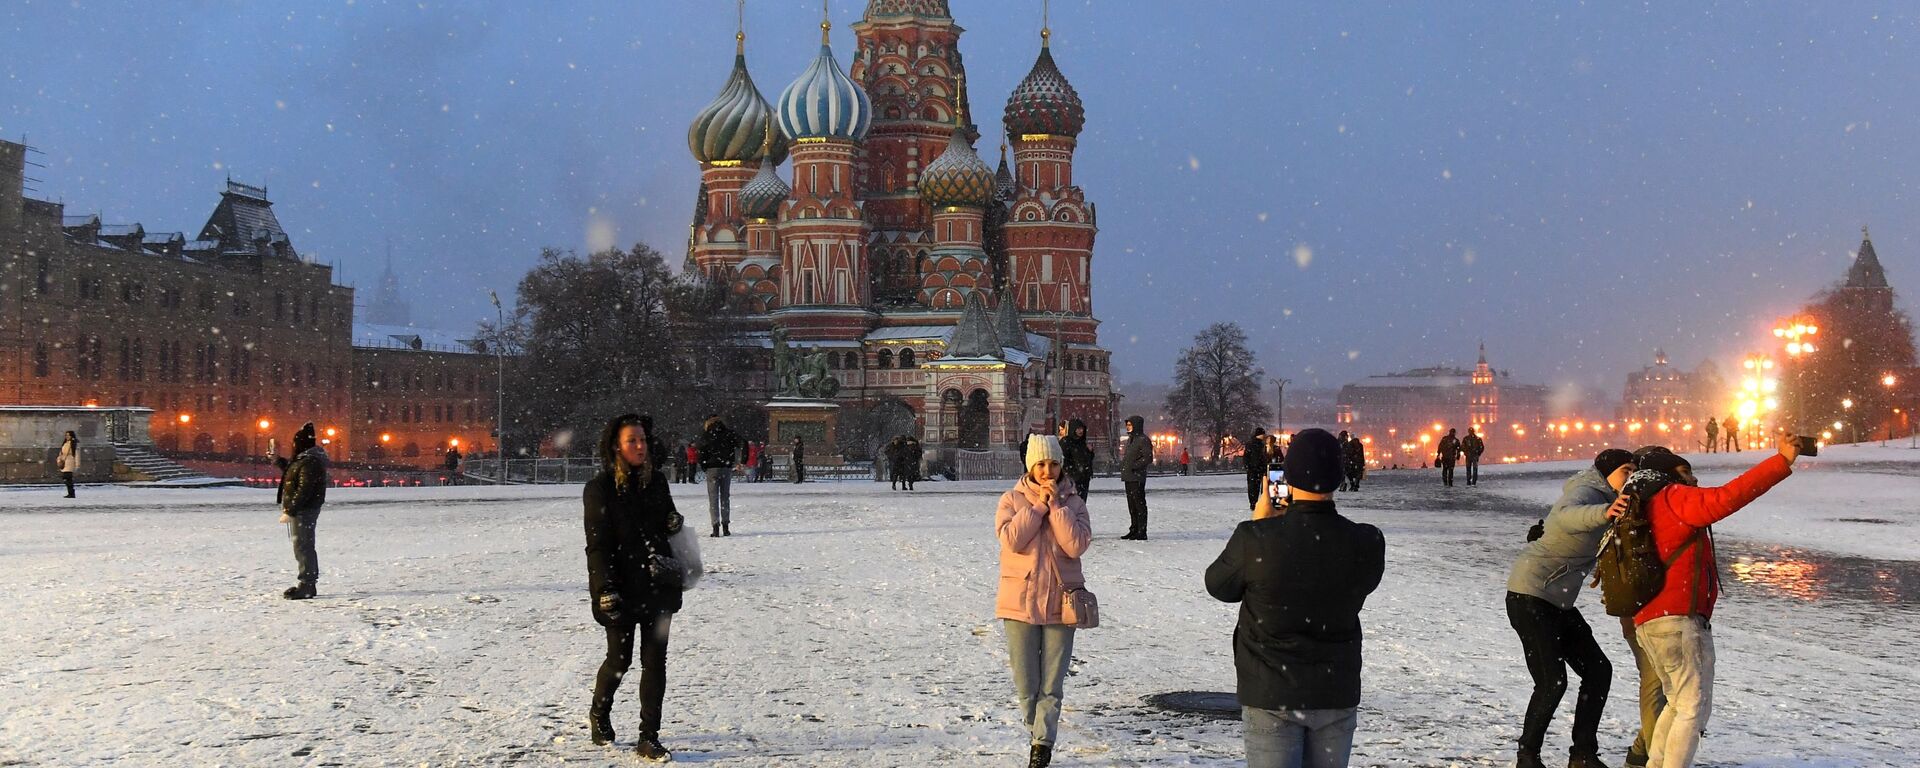 People are taking selfies in snowy Red Square in Moscow - Sputnik International, 1920, 24.02.2023